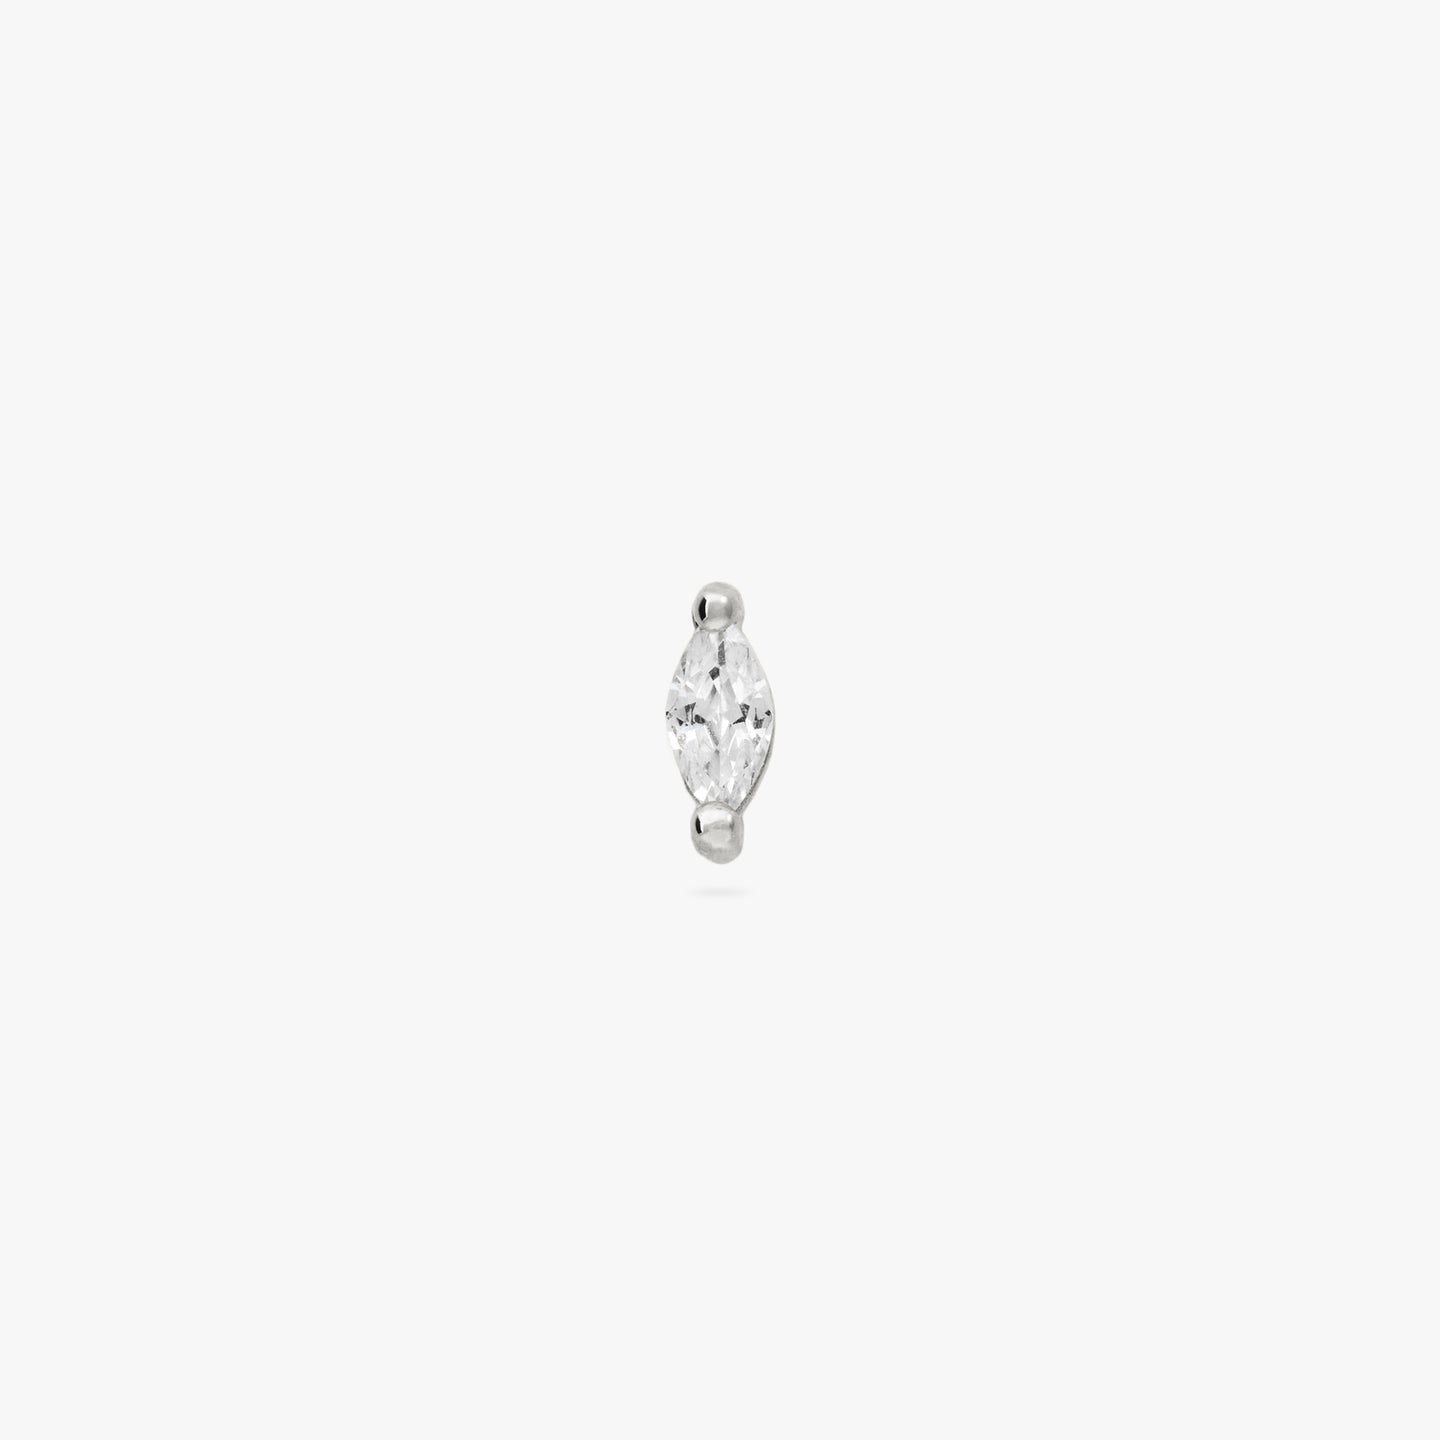 The marquise mini stud features a clear oblong shaped gem and has silver accents color:null|silver/clear